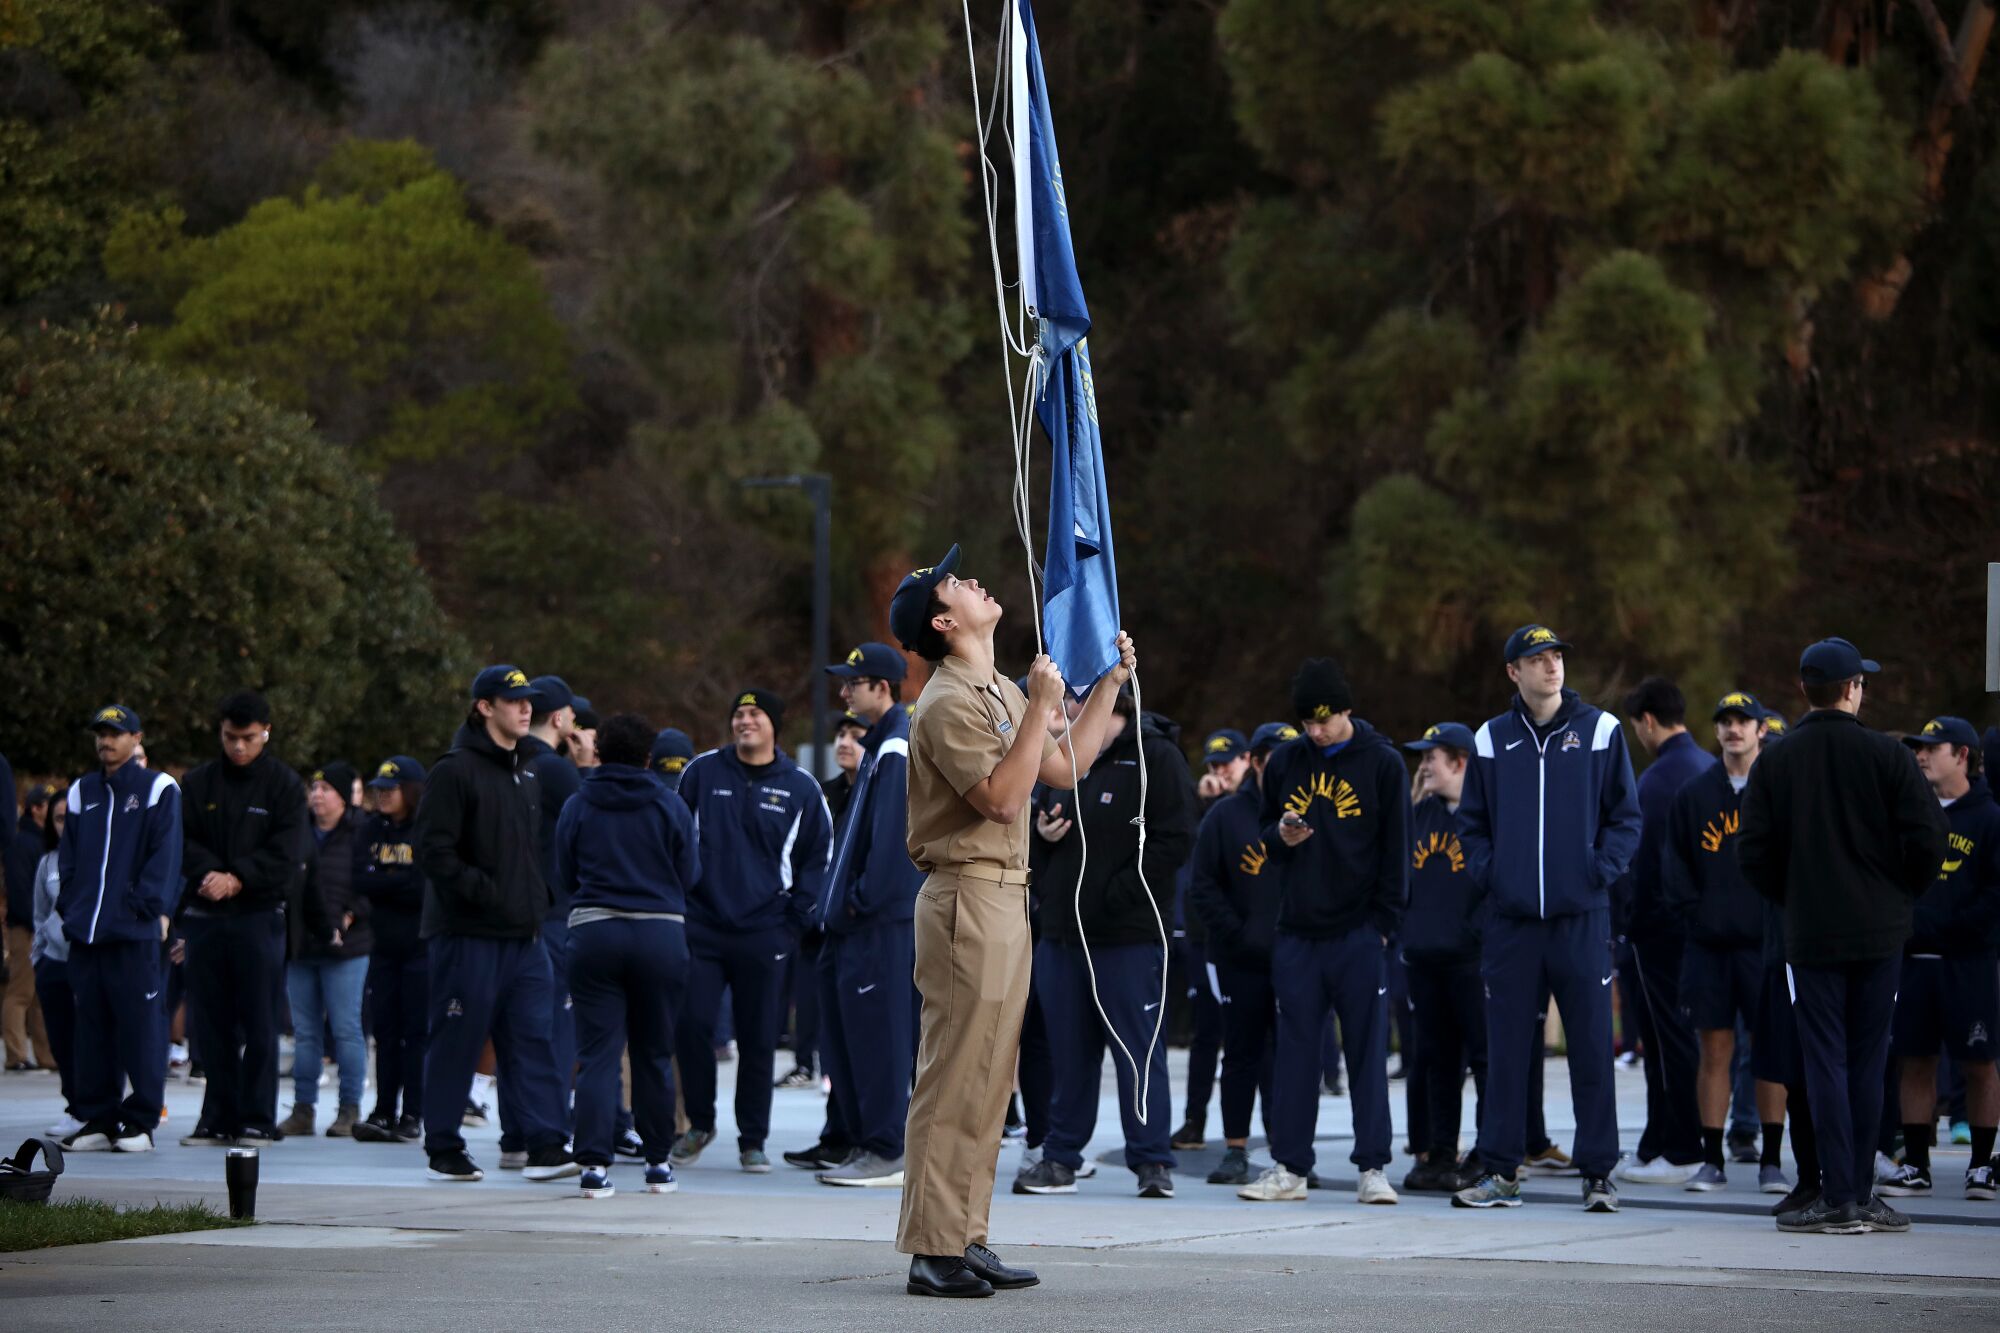 A person raises a blue flag outdoors as many people stand in the background.